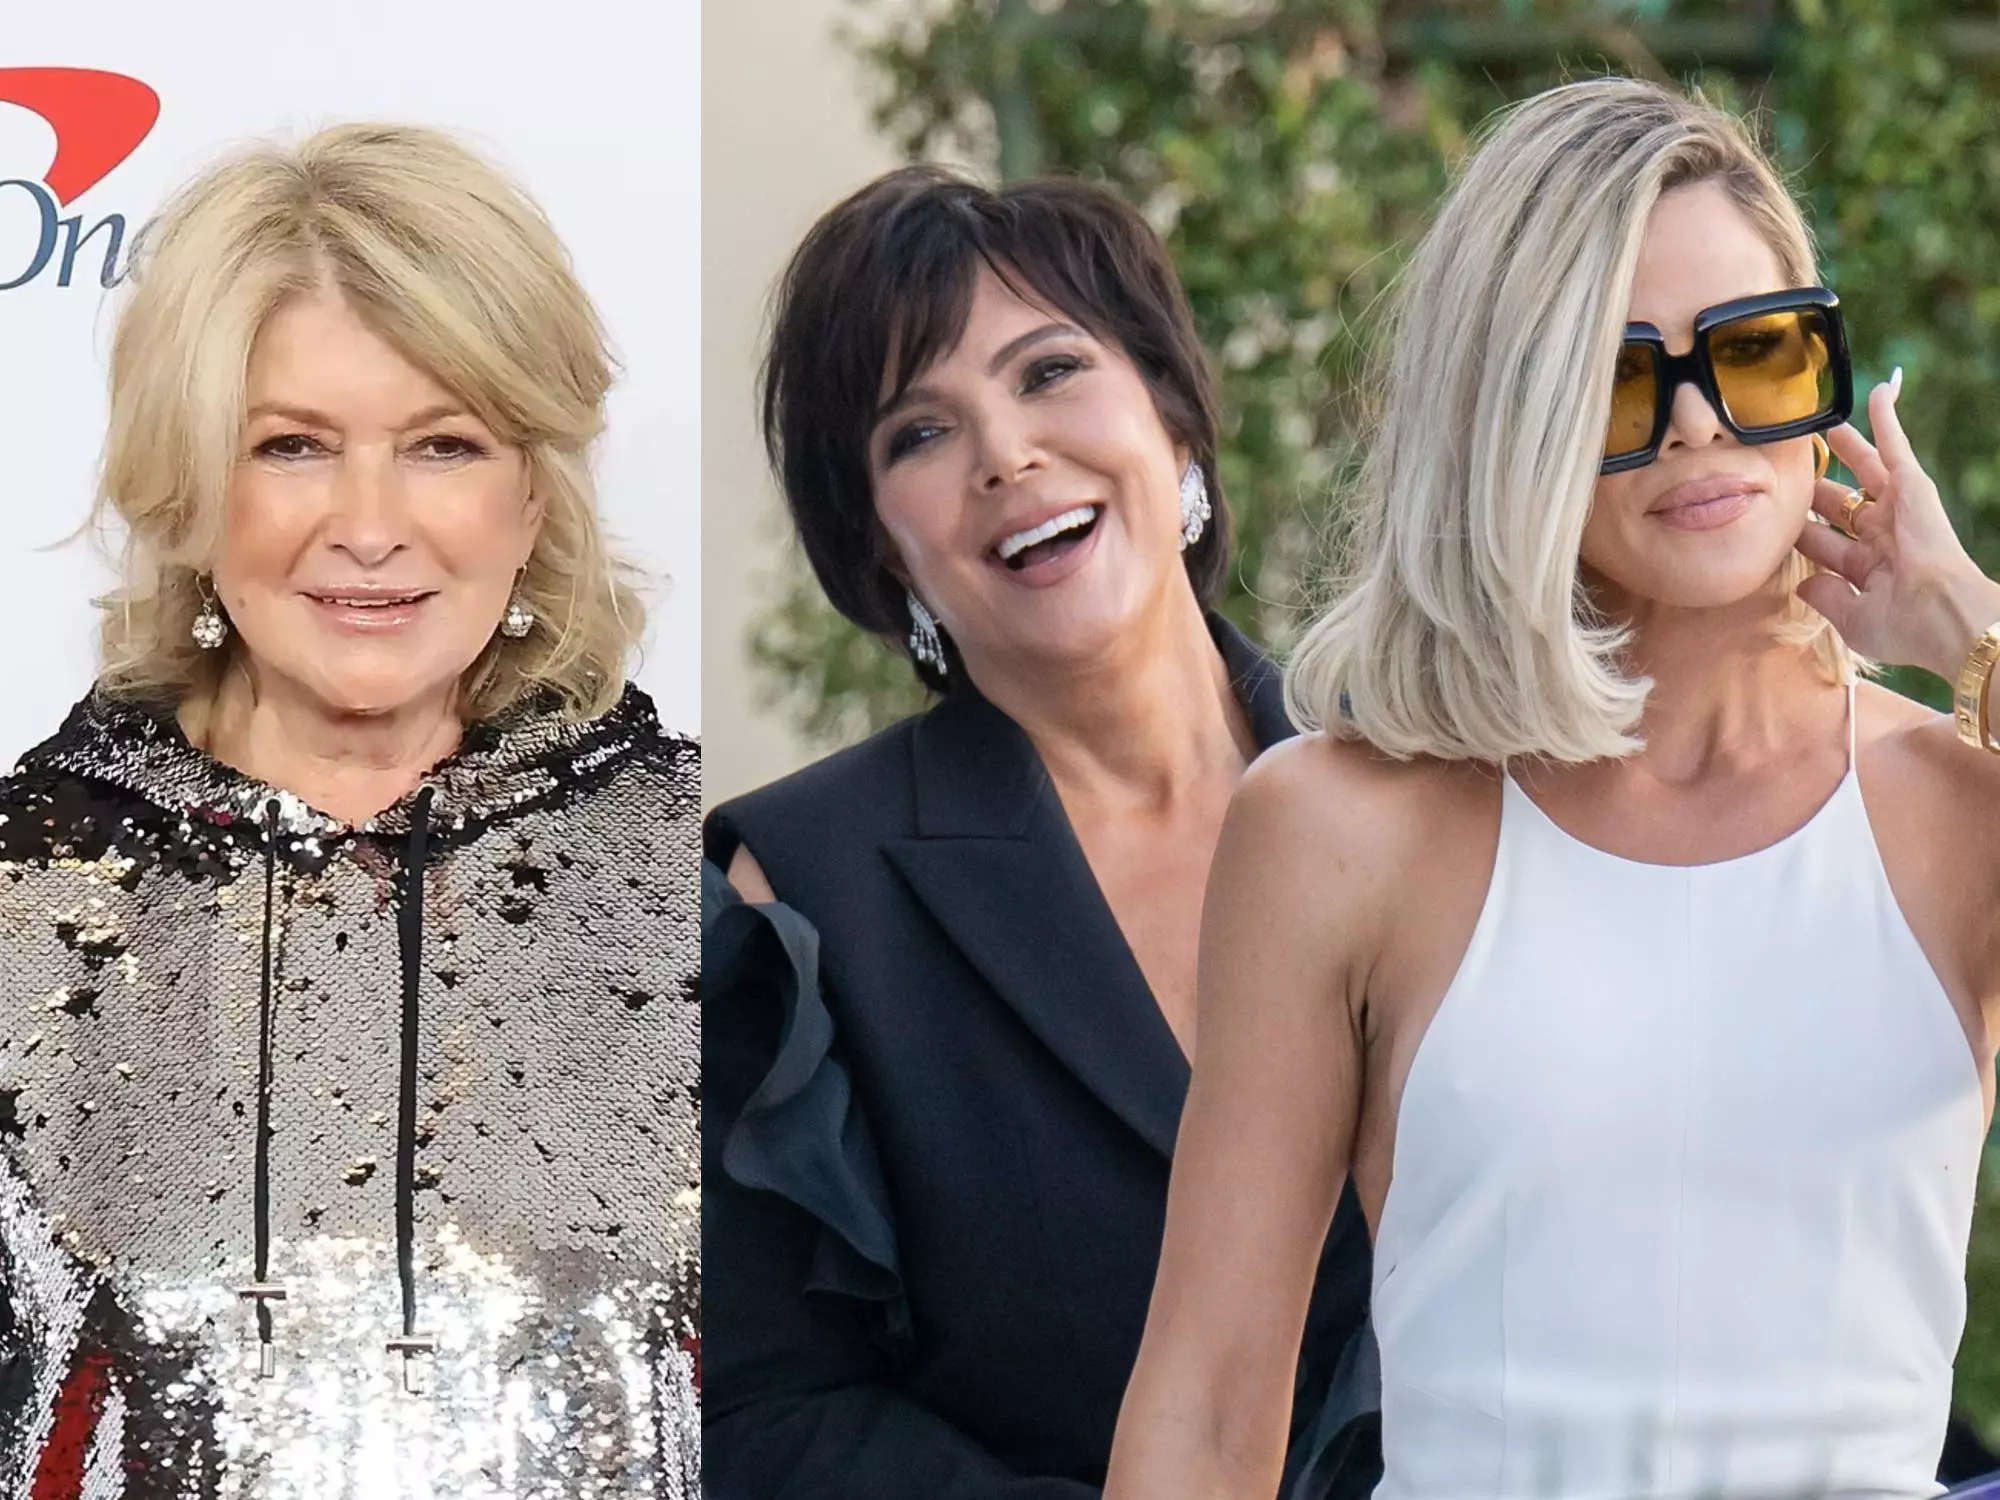 Khloé Kardashian Got Mad At Kris Jenner For Trying To Buy Her A Peacock From Martha Stewart To